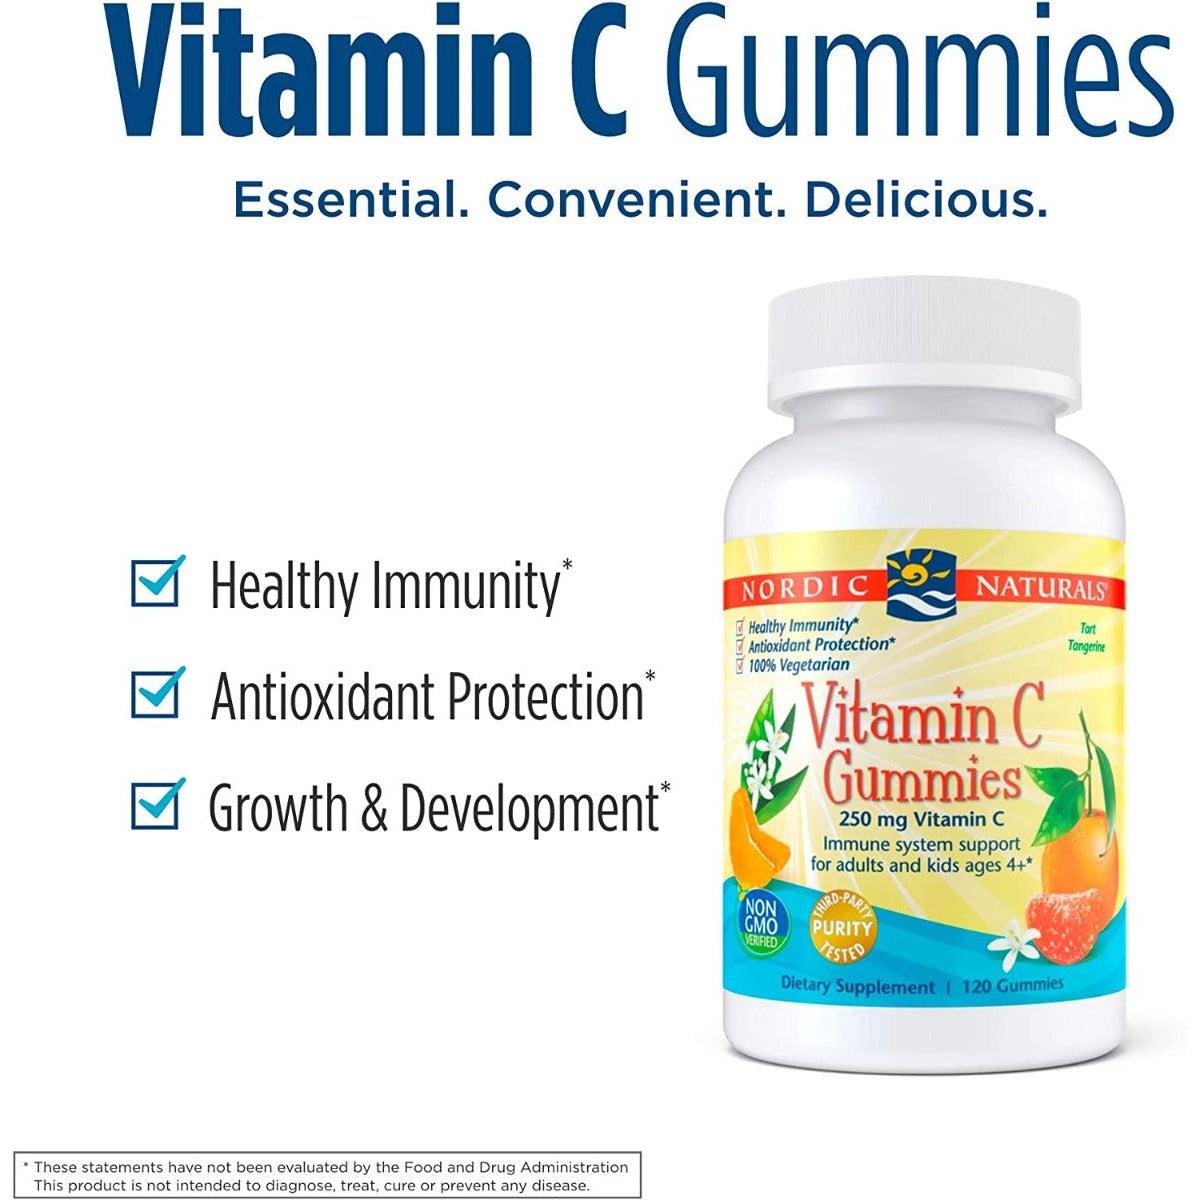 Nordic Naturals Vitamin C Gummies Non-GMO 120 Gummies For Adults and Kids Ages 4+